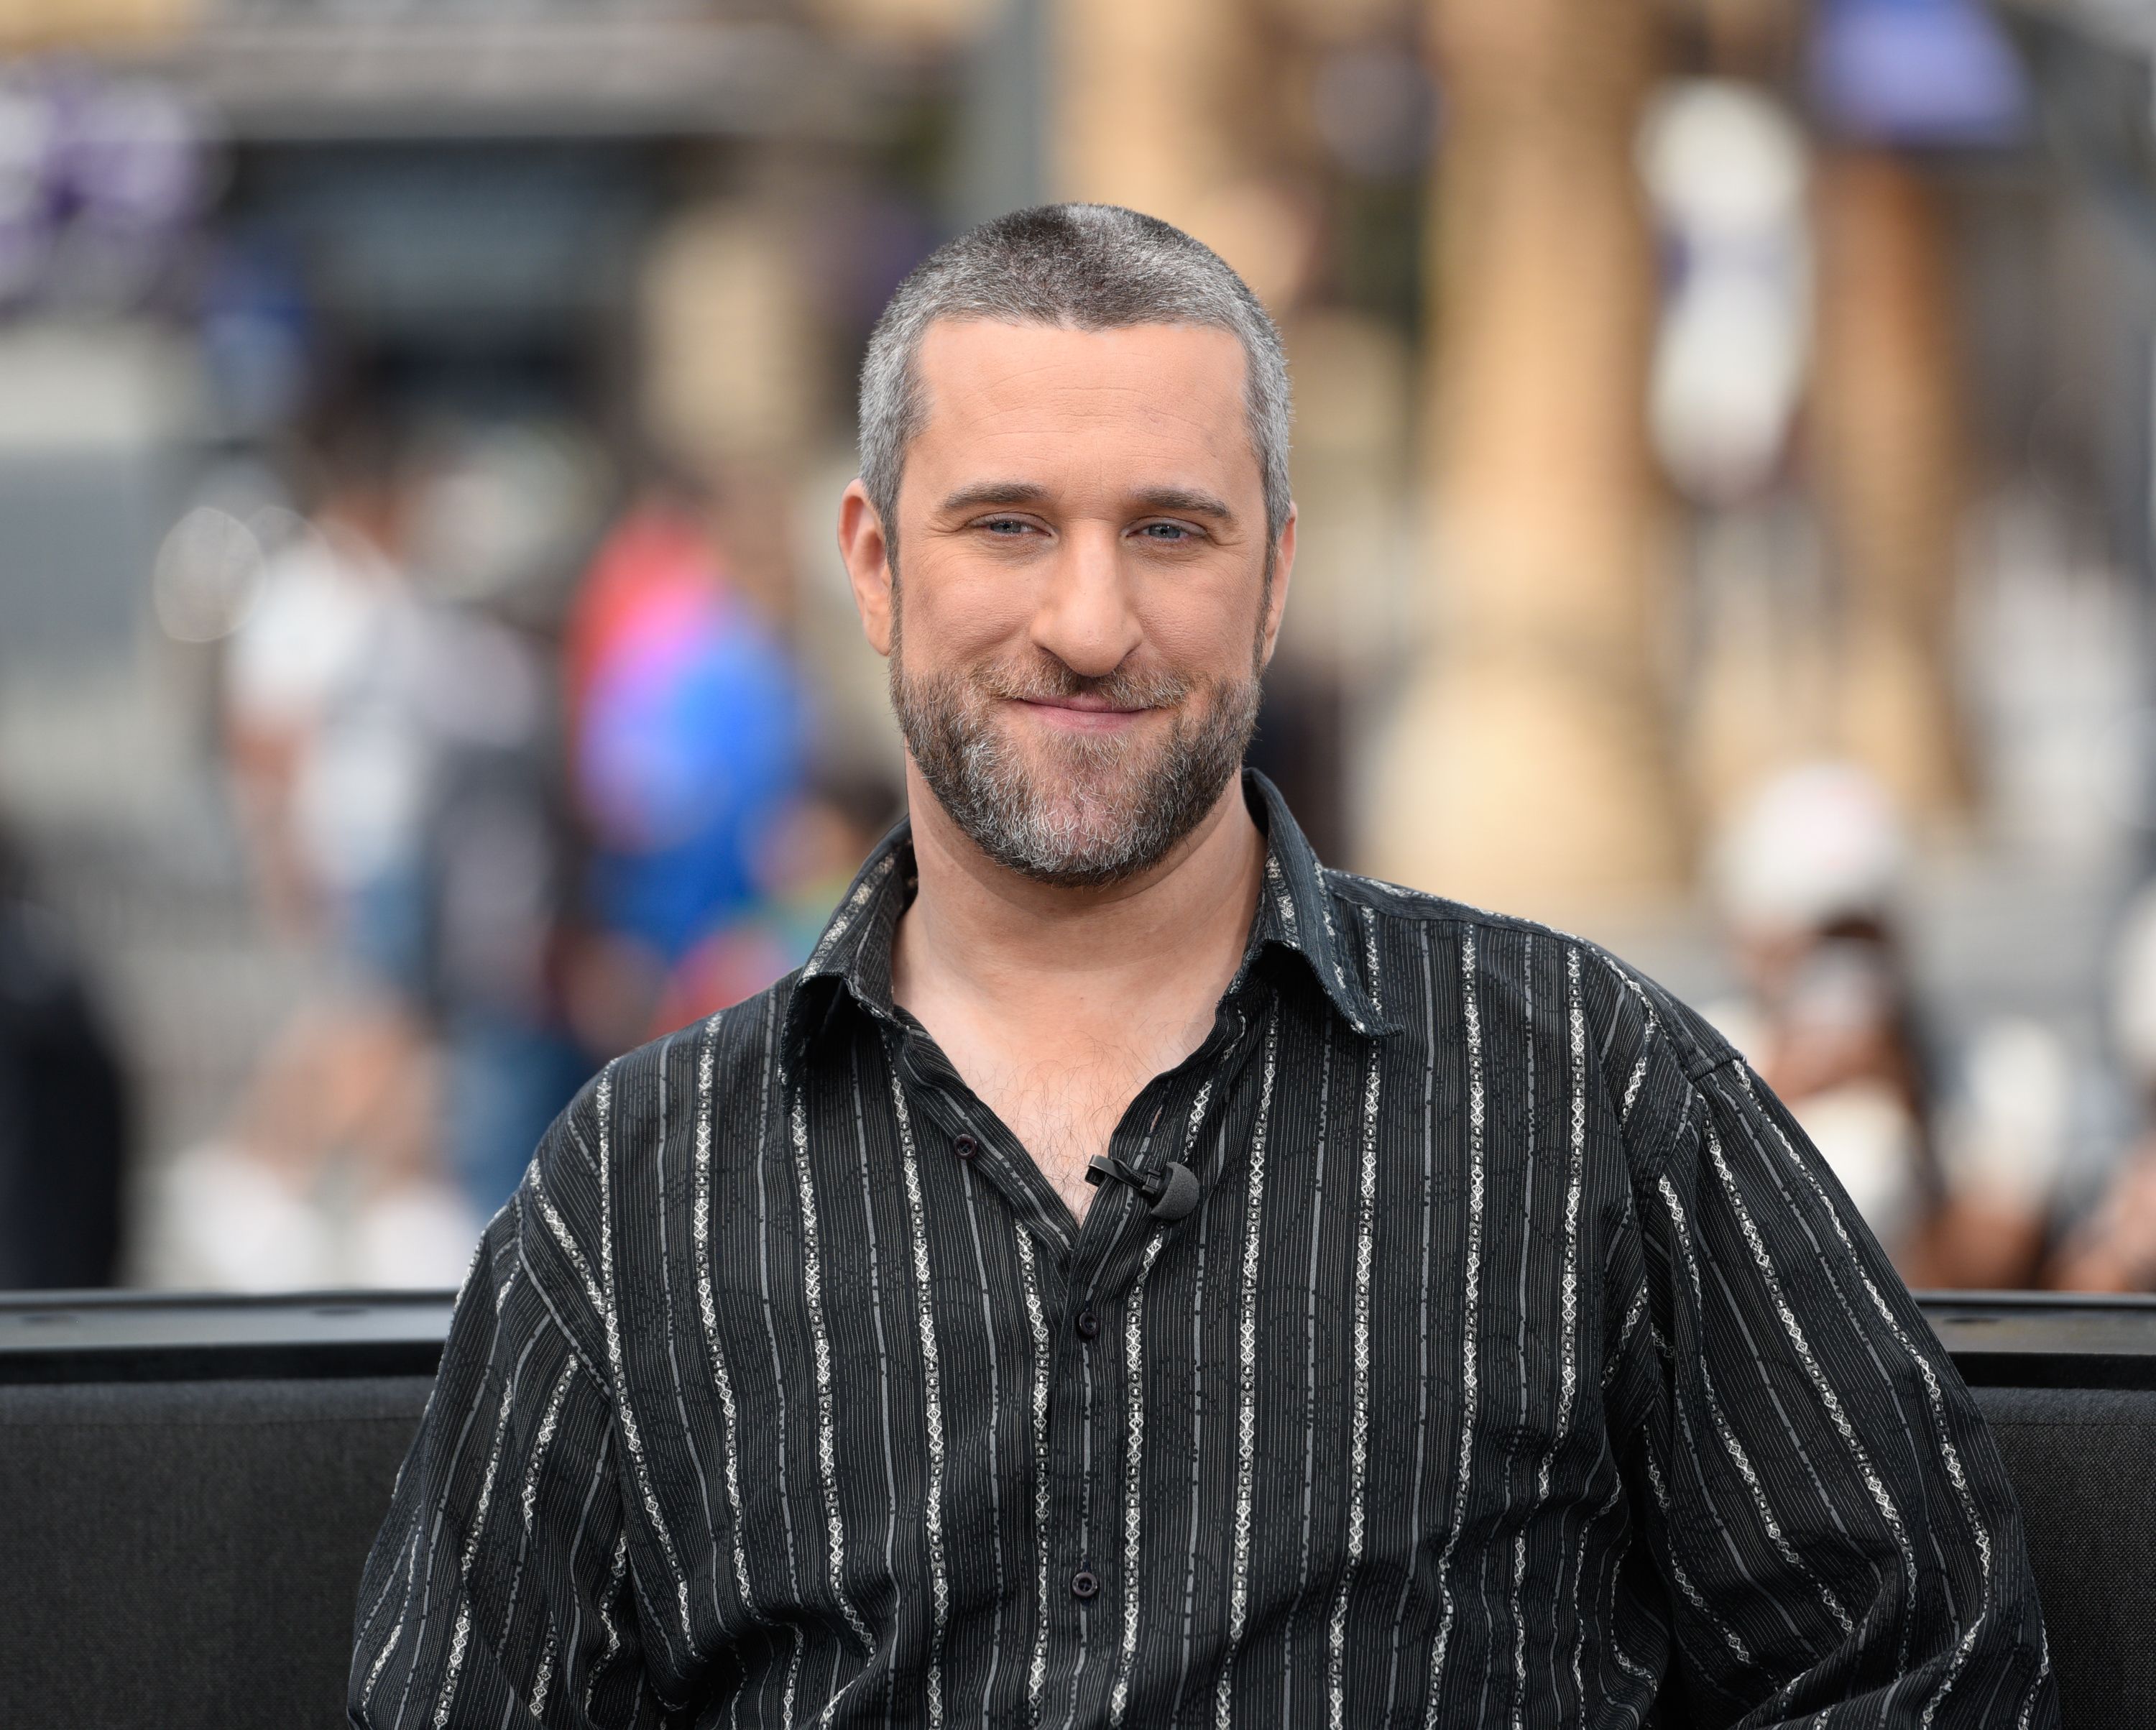 Dustin Diamond visits "Extra" at Universal Studios Hollywood on May 16, 2016. | Photo: Getty Images